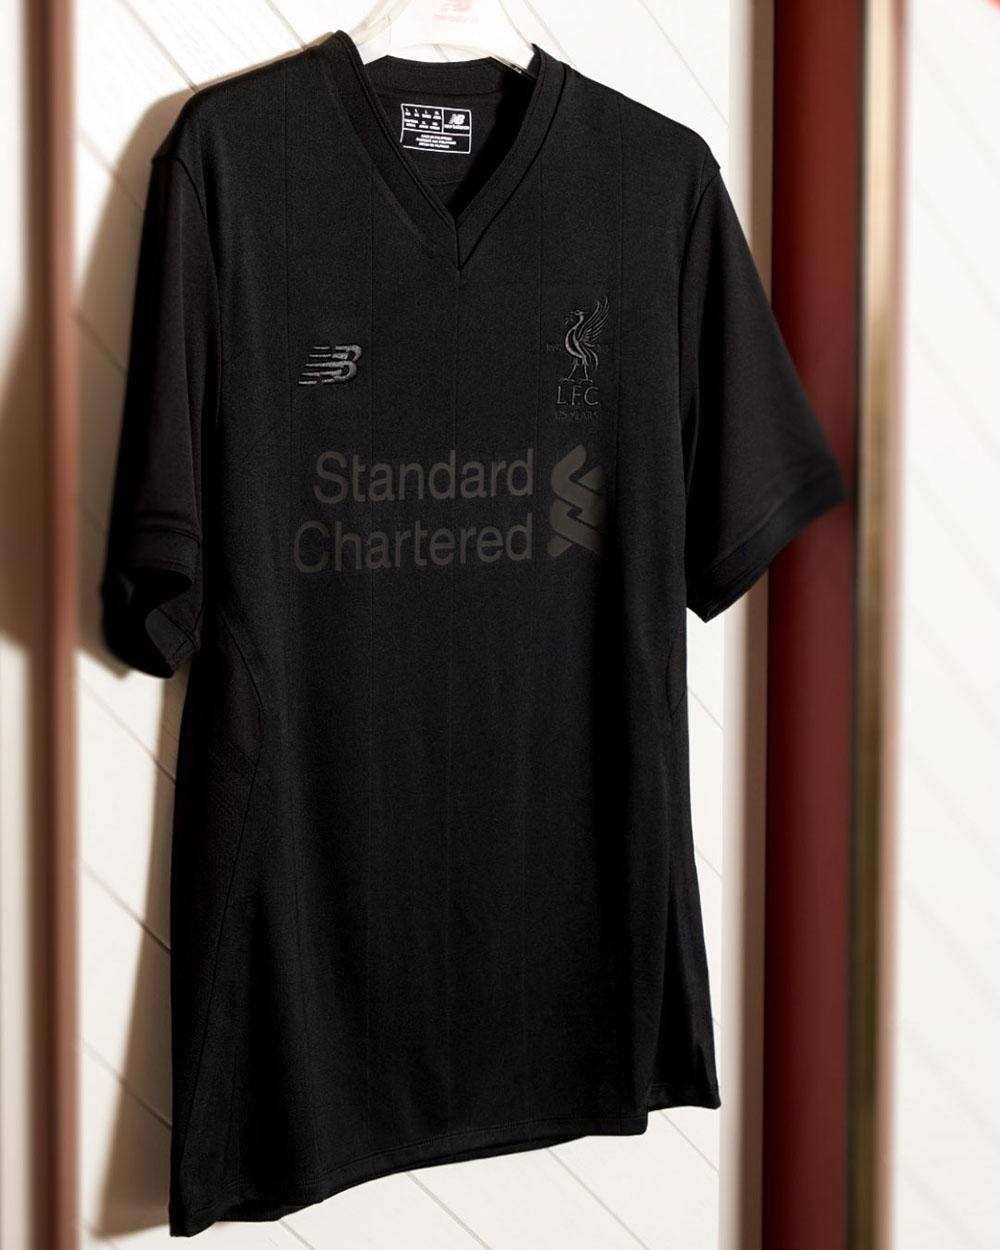 New Balance reveals limited edition pitch black Liverpool jersey